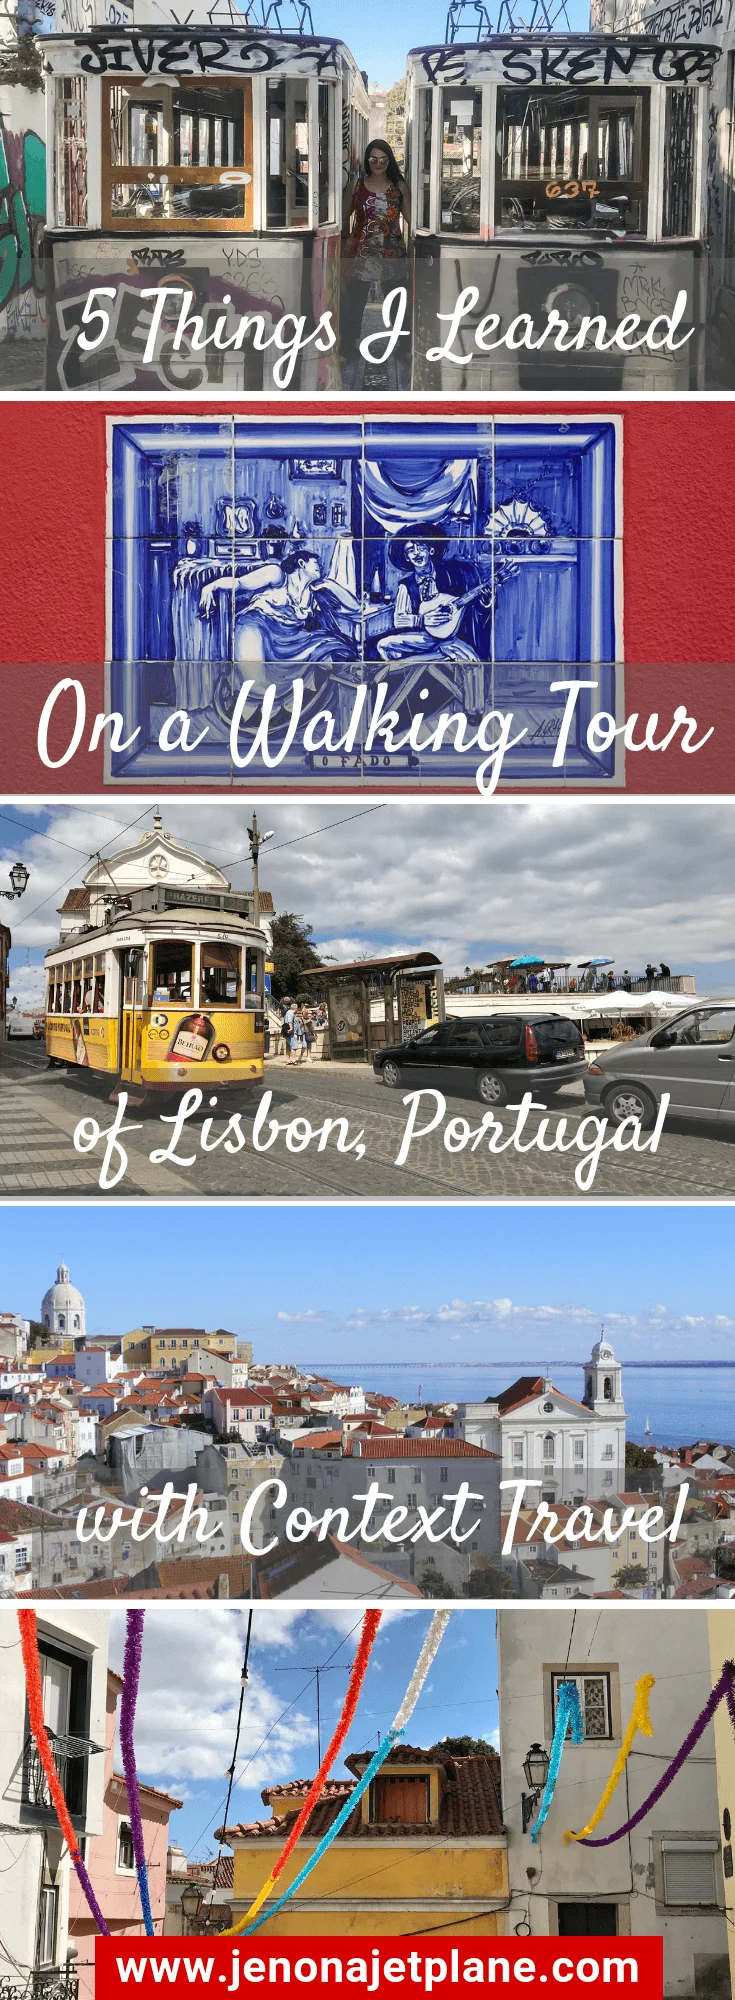 Want to take a Lisbon walking tour? I recommend going with Context Travel to experience the city like a local. Save to your travel board for inspiration. #lisbonportugal #lisbonwalkingtour #lisbontravel #contexttravel